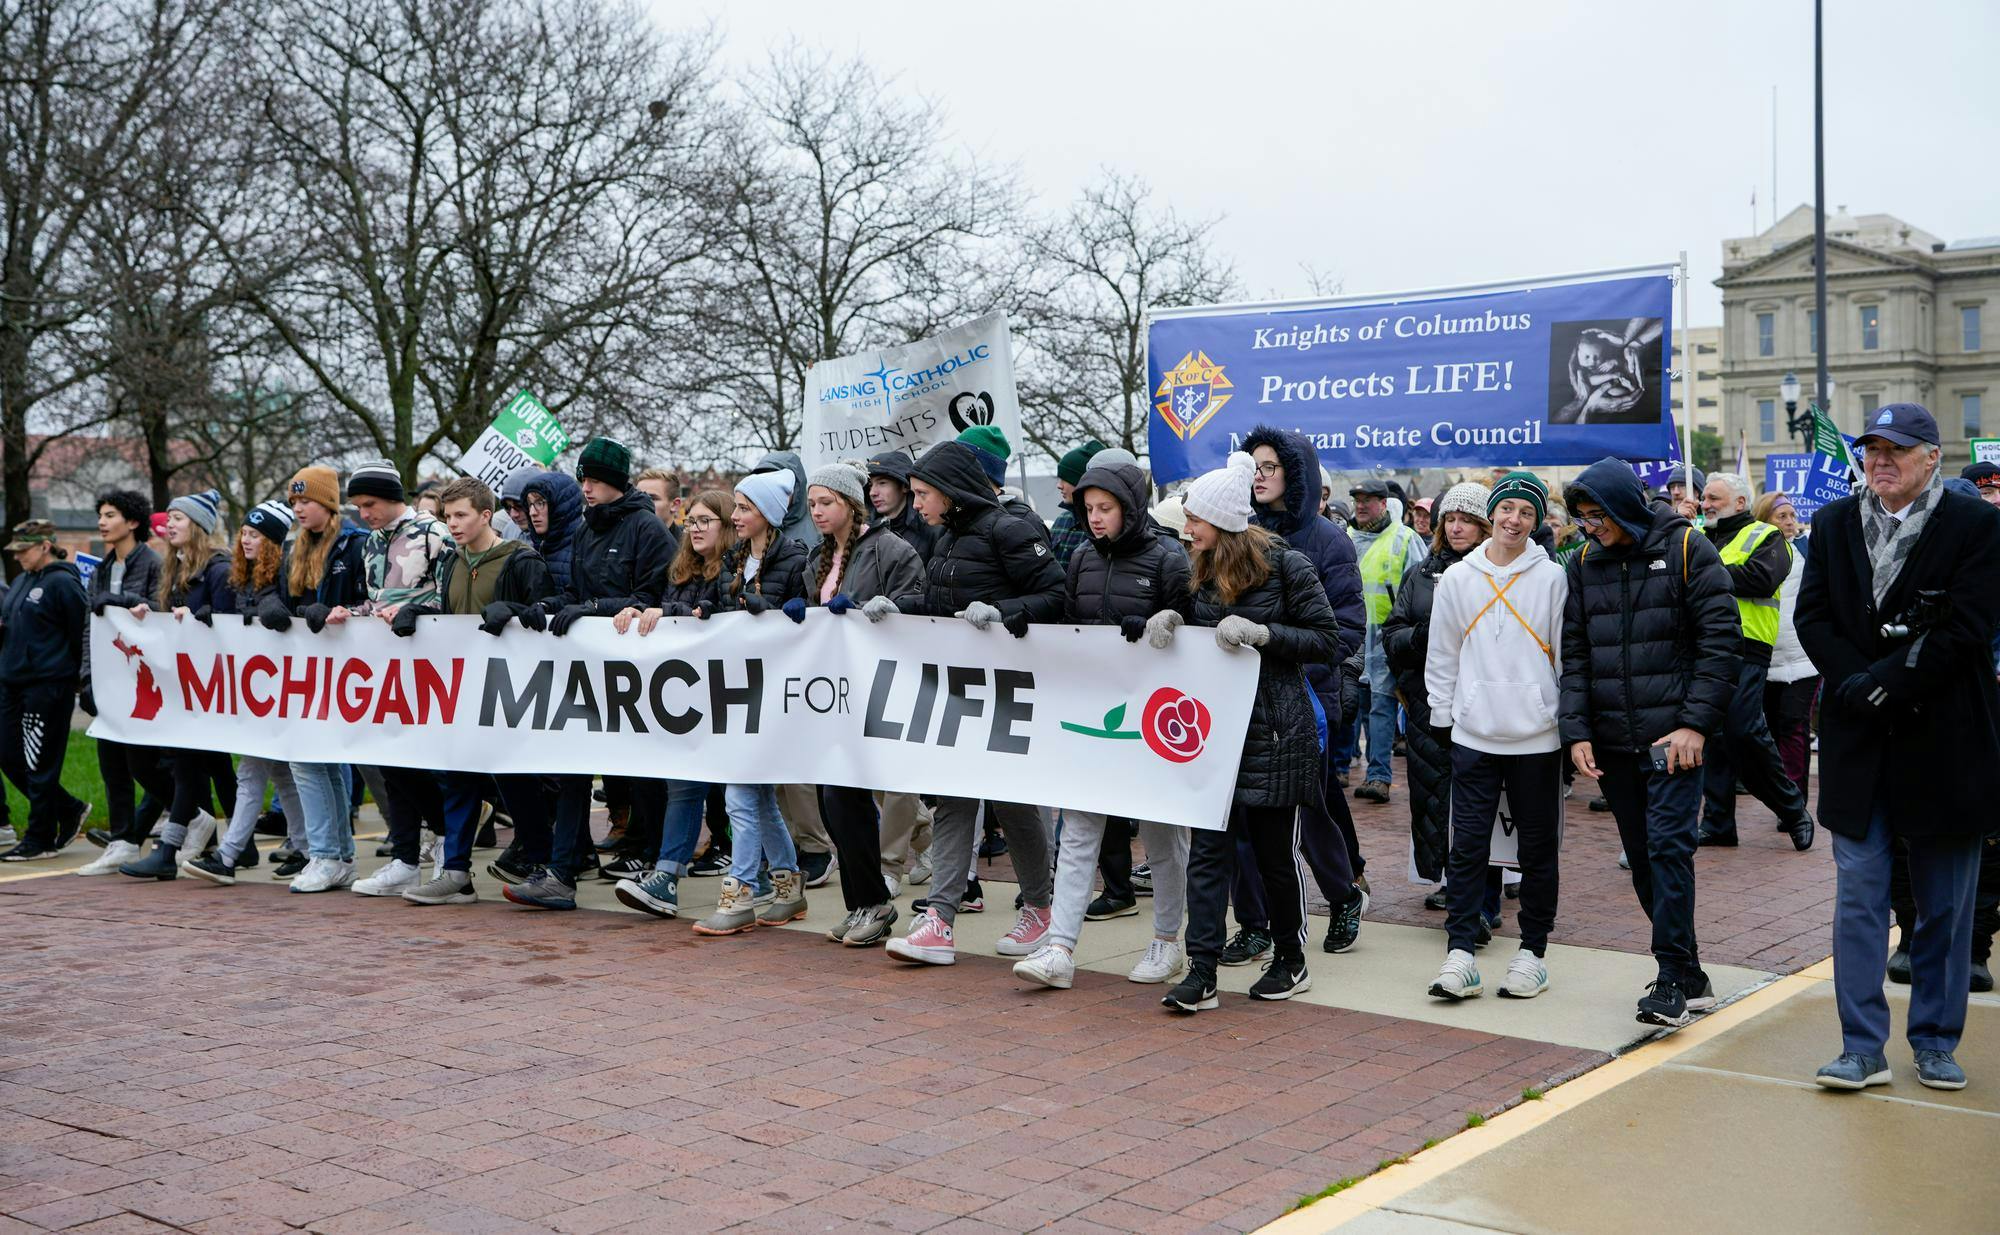 <p>Pro-life supporters hold a “Michigan March for Life” banner as they walk in protest from the Michigan State Capitol on Nov. 8, 2023.</p>